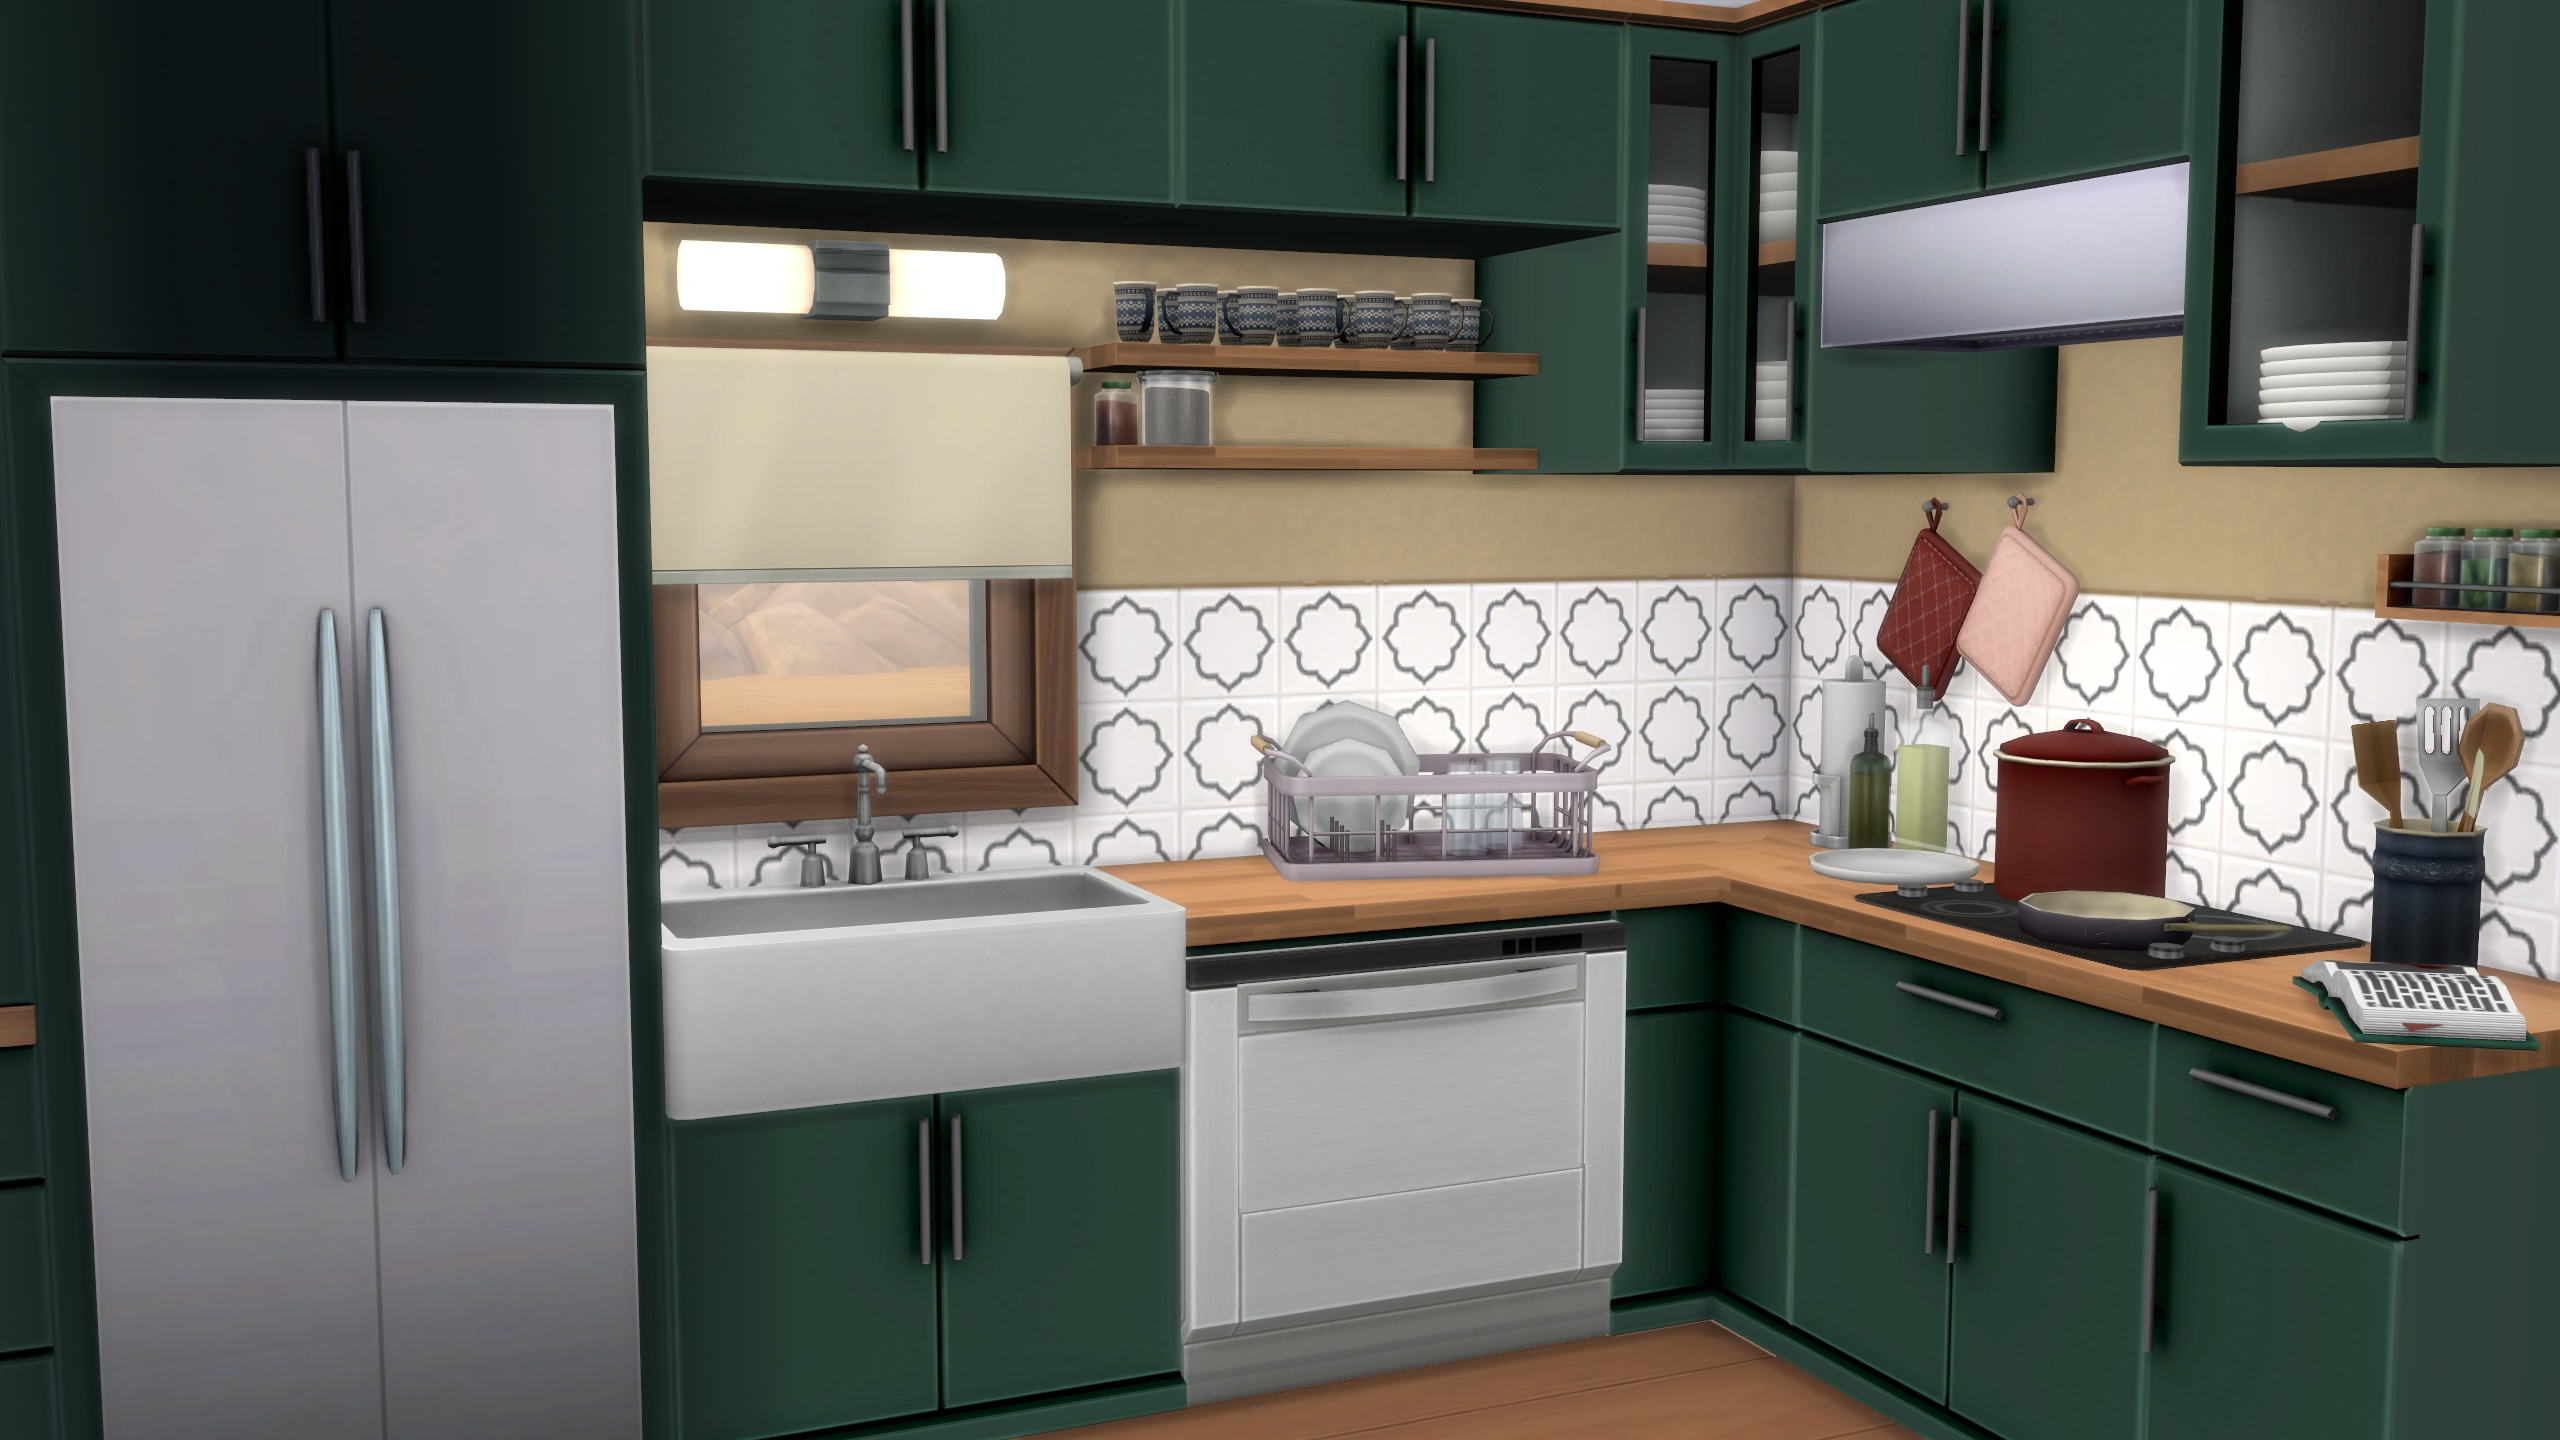 The Sims 4 CC - Kitchen with custom butcher counters and green cabinets and custom clutter.